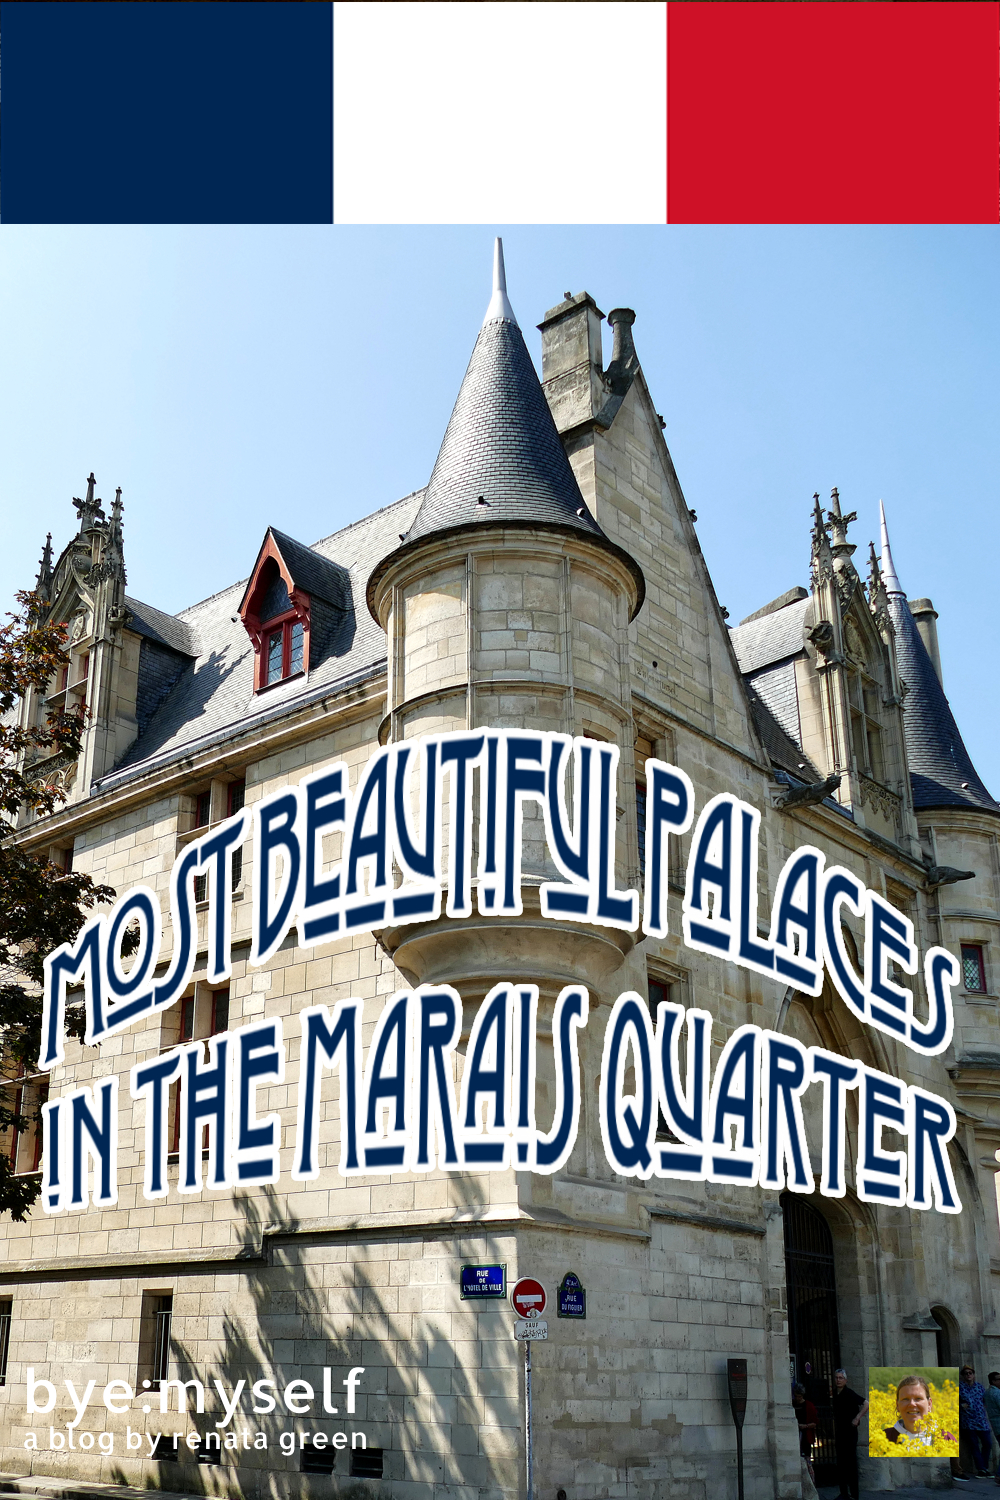 In this post, I'm inviting you on a stroll that will take us to the ten most beautiful palaces in the Marais Neighborhood of Paris. #marais #lemarais #paris #france #palaces #mansions #architecture #art #arttrip #artwalk #byemyself